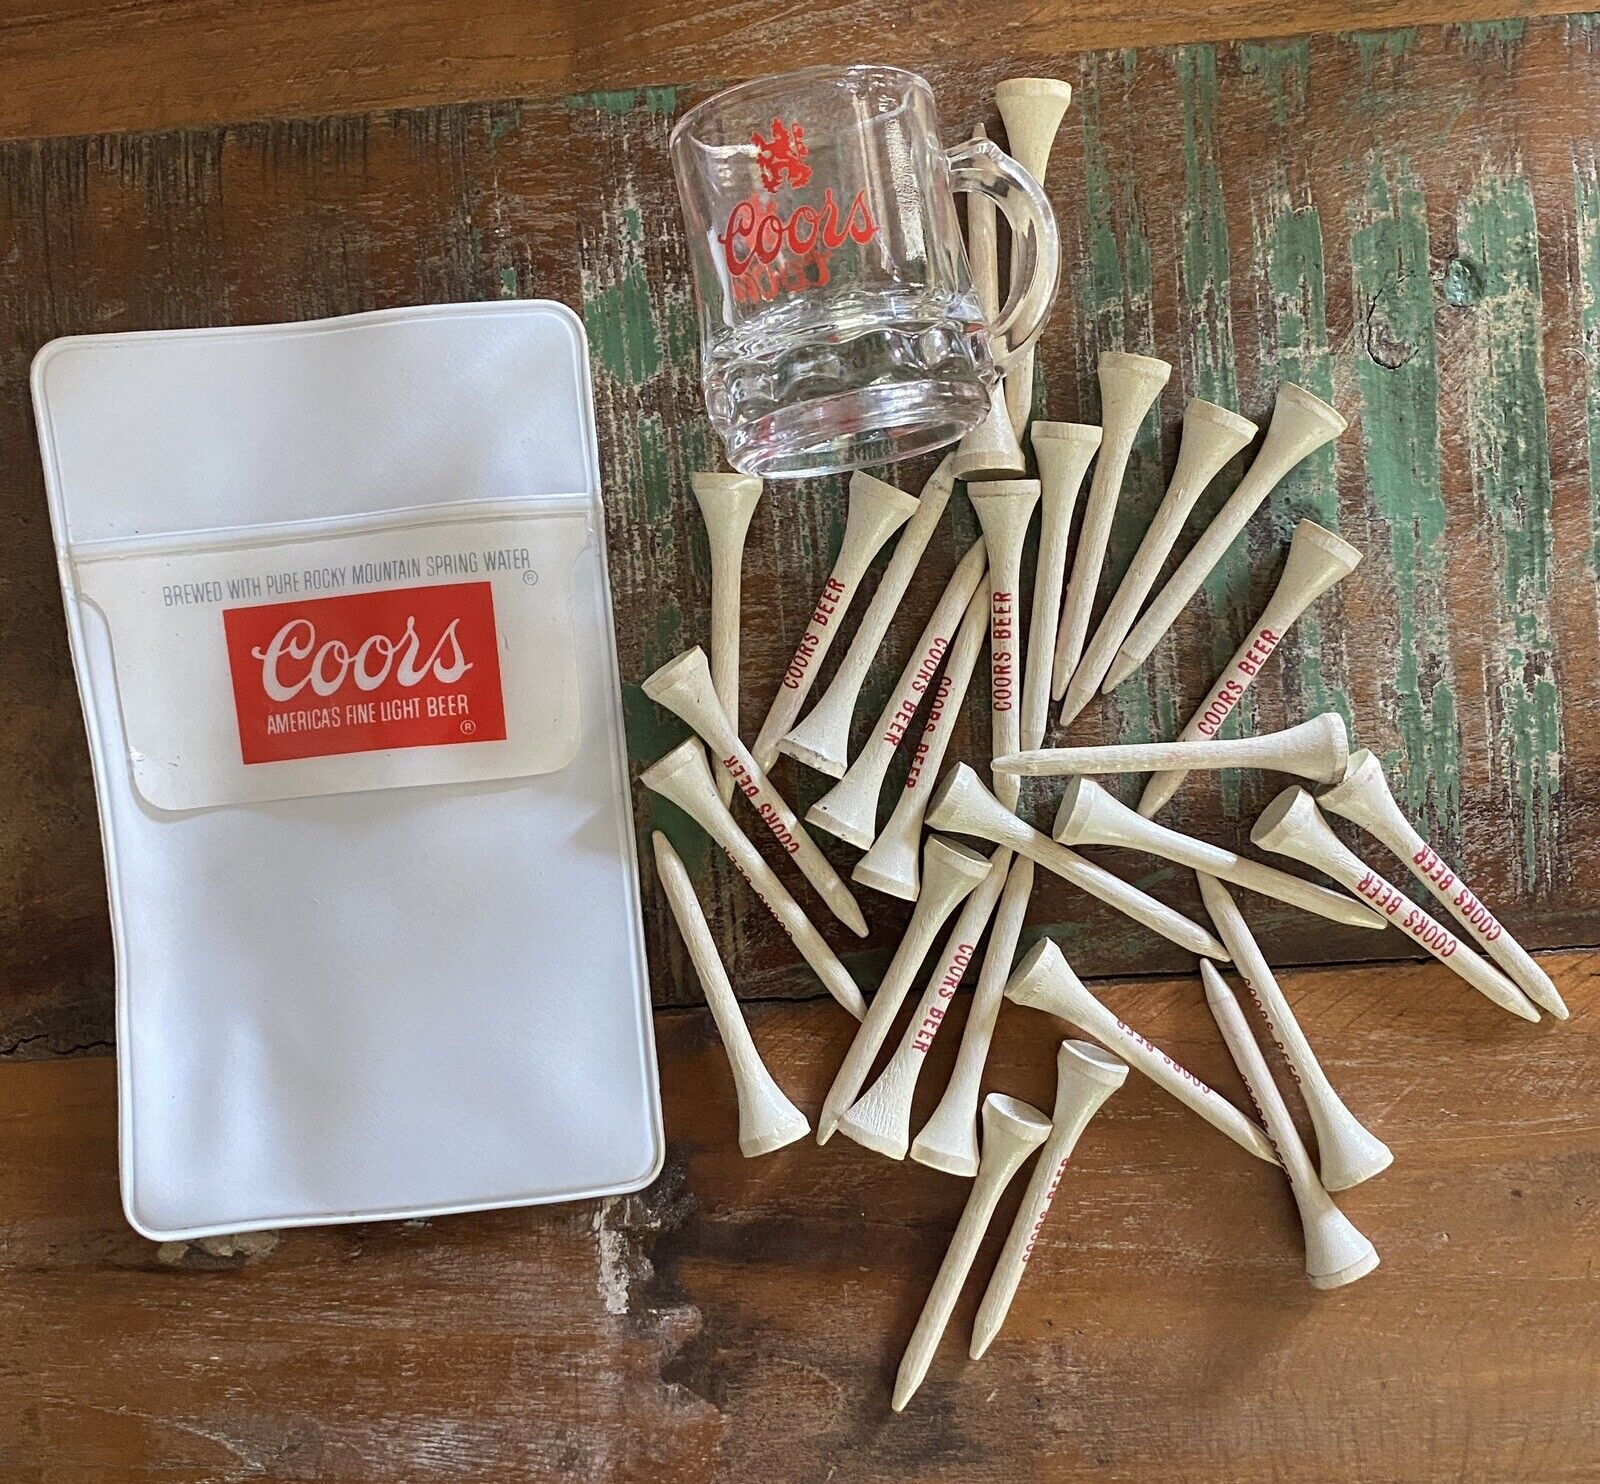 Coors Beer Vintage Golf Tees (29), Used Pocket Protector and Souvenir Shot Glass